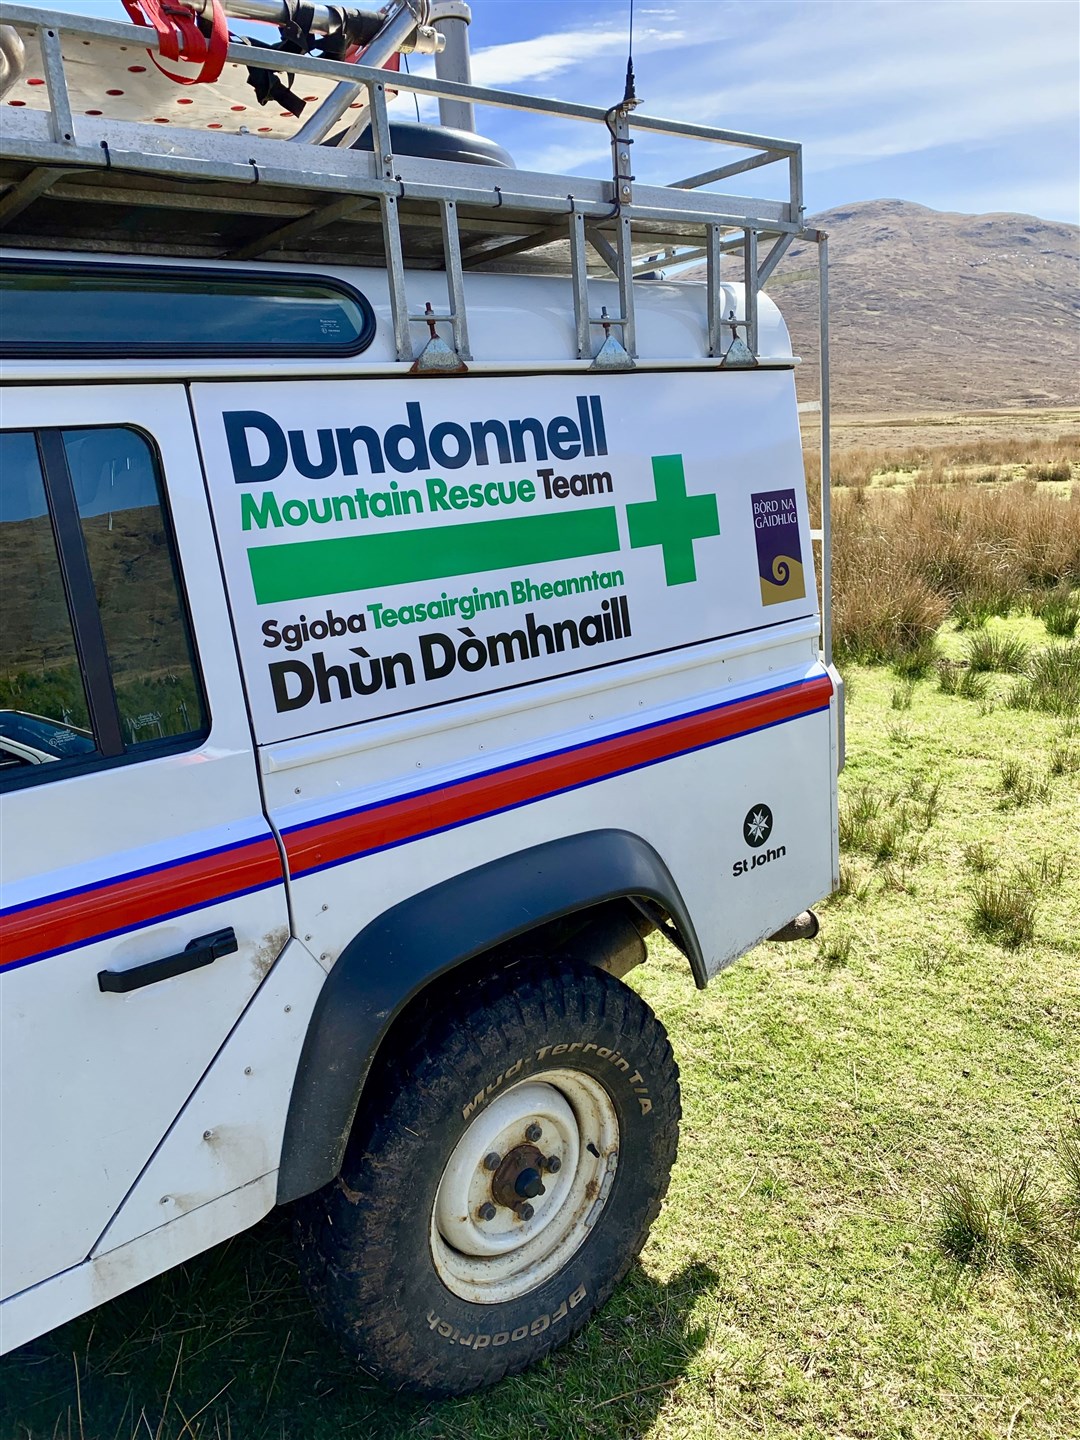 Dundonnell's Mountain Rescue Team were called out to the Loch Mullardoch hills.